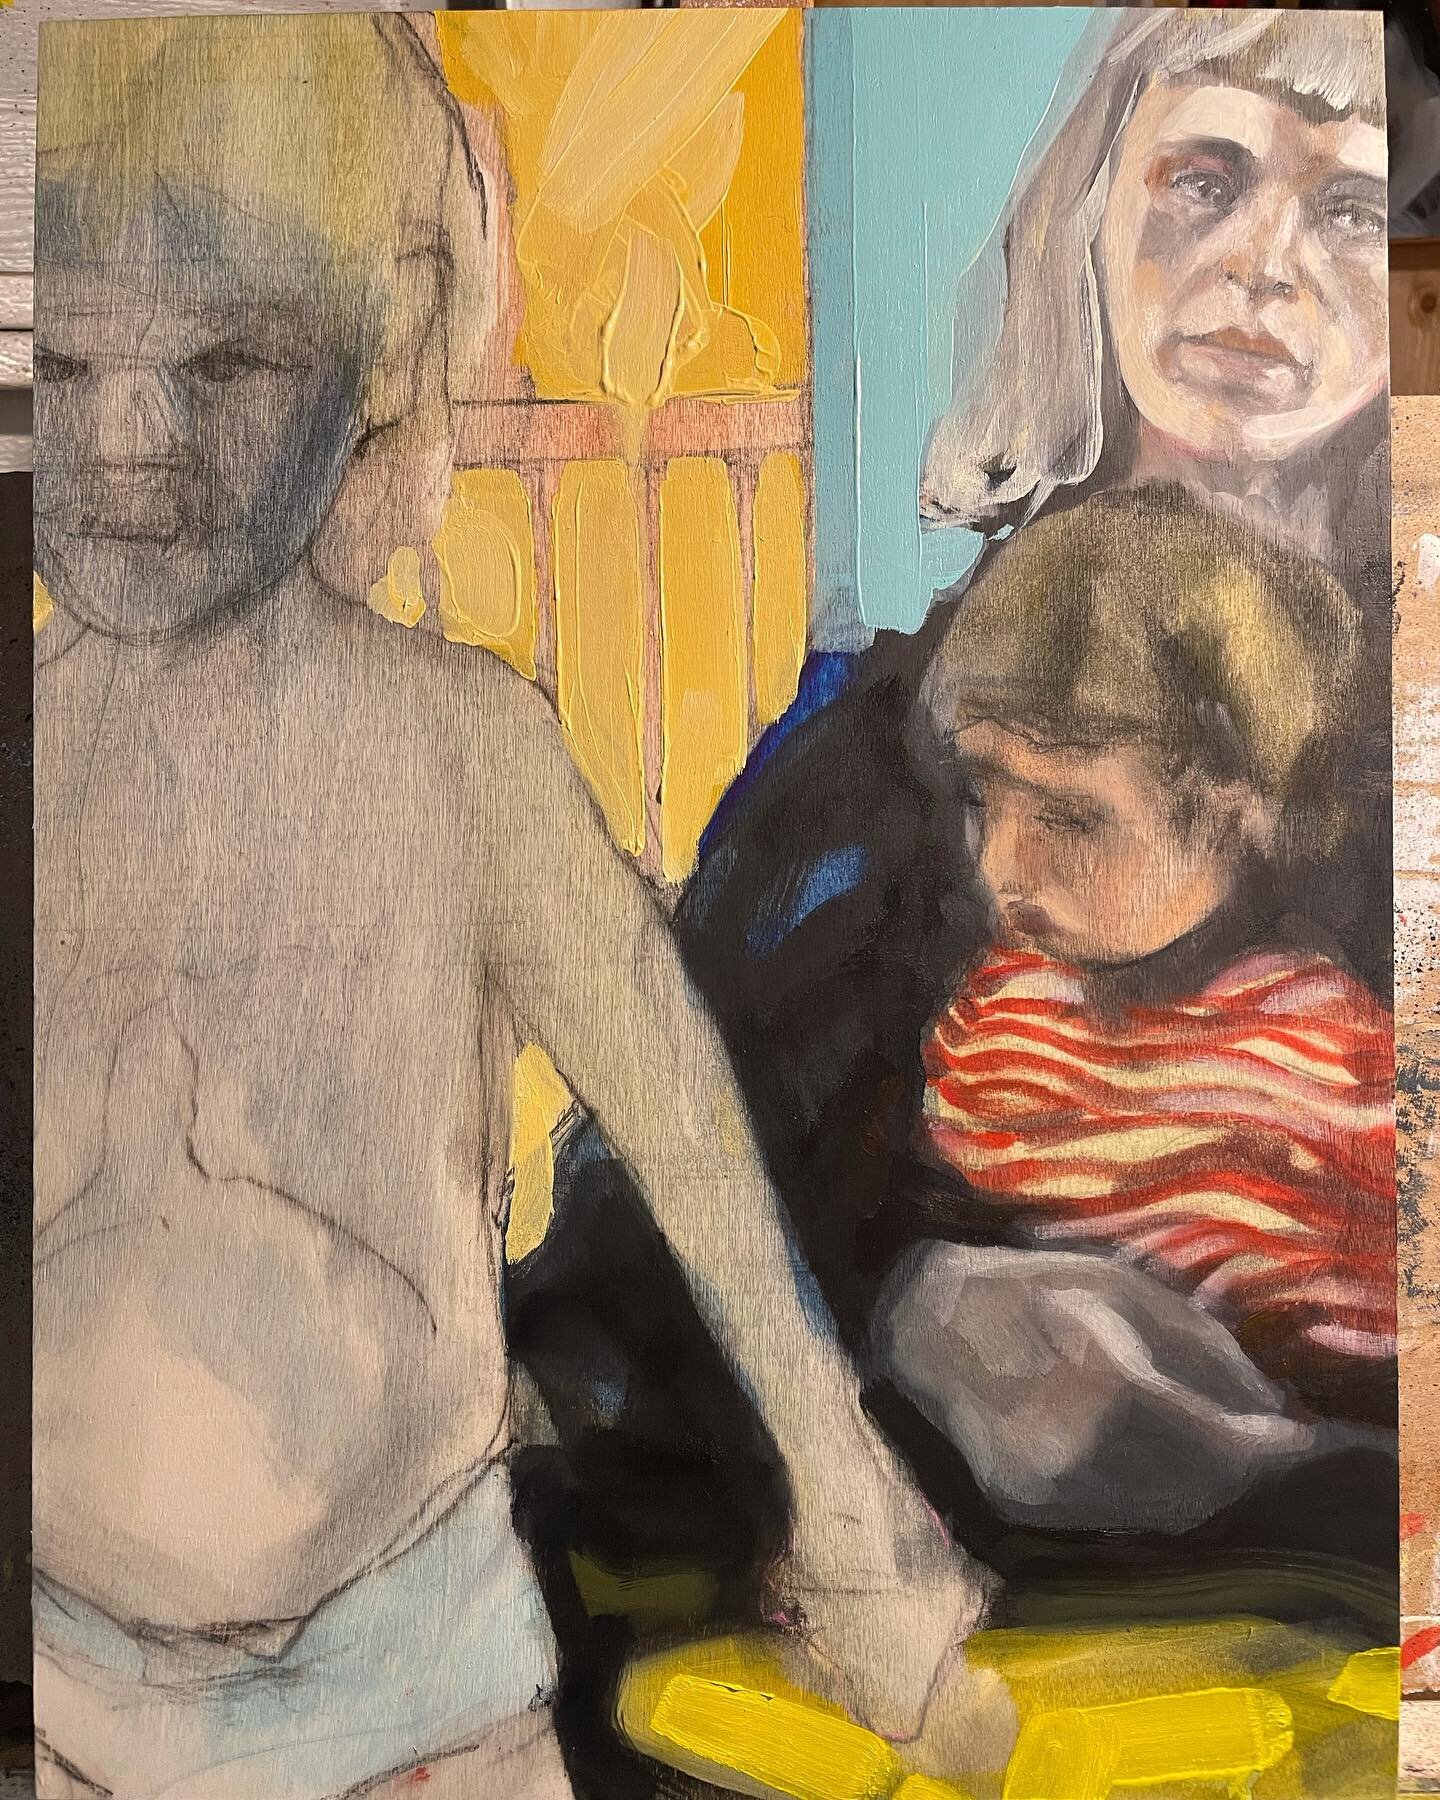 &lsquo;Mother mother&rsquo; #finished #ithink #newwork #oilonpanel #figurativeart #contemporaryart #art #oilpainting #narrrativepainting